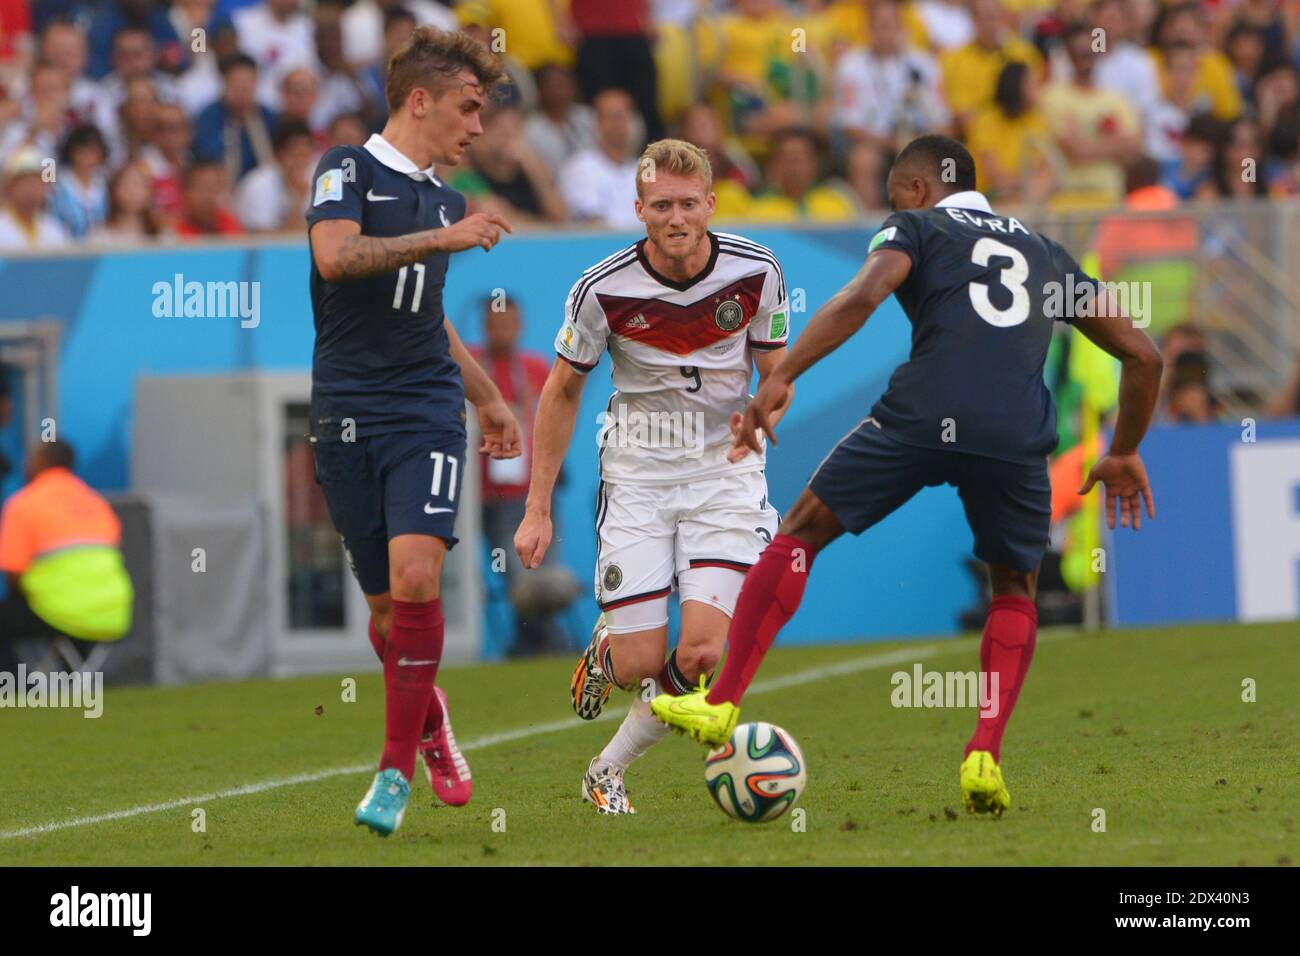 France's Antoine Griezmann and Patrice Evra battling Germany's Andre Schurrle in Soccer World Cup 2014 1/4 of Final round match France vs Germany at Maracana Stadium, Rio de Janeiro, Brazil on July 4th 2014. Germany won 1-0. Photo by Henri Szwarc/ABACAPRESS.COM Stock Photo